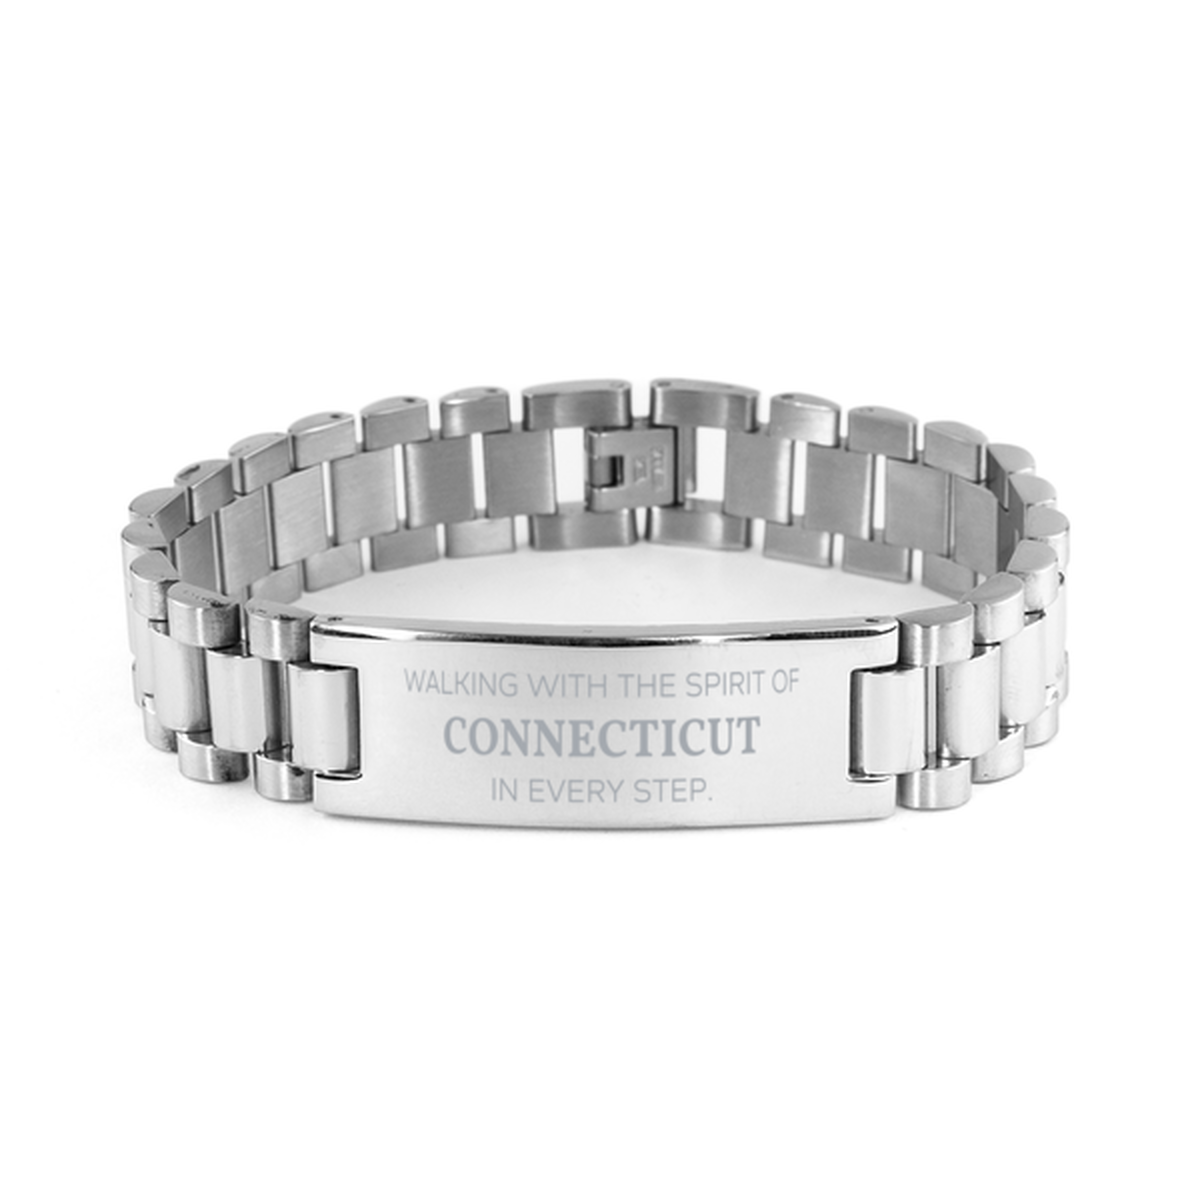 Connecticut Gifts, Walking with the spirit, Love Connecticut Birthday Christmas Ladder Stainless Steel Bracelet For Connecticut People, Men, Women, Friends